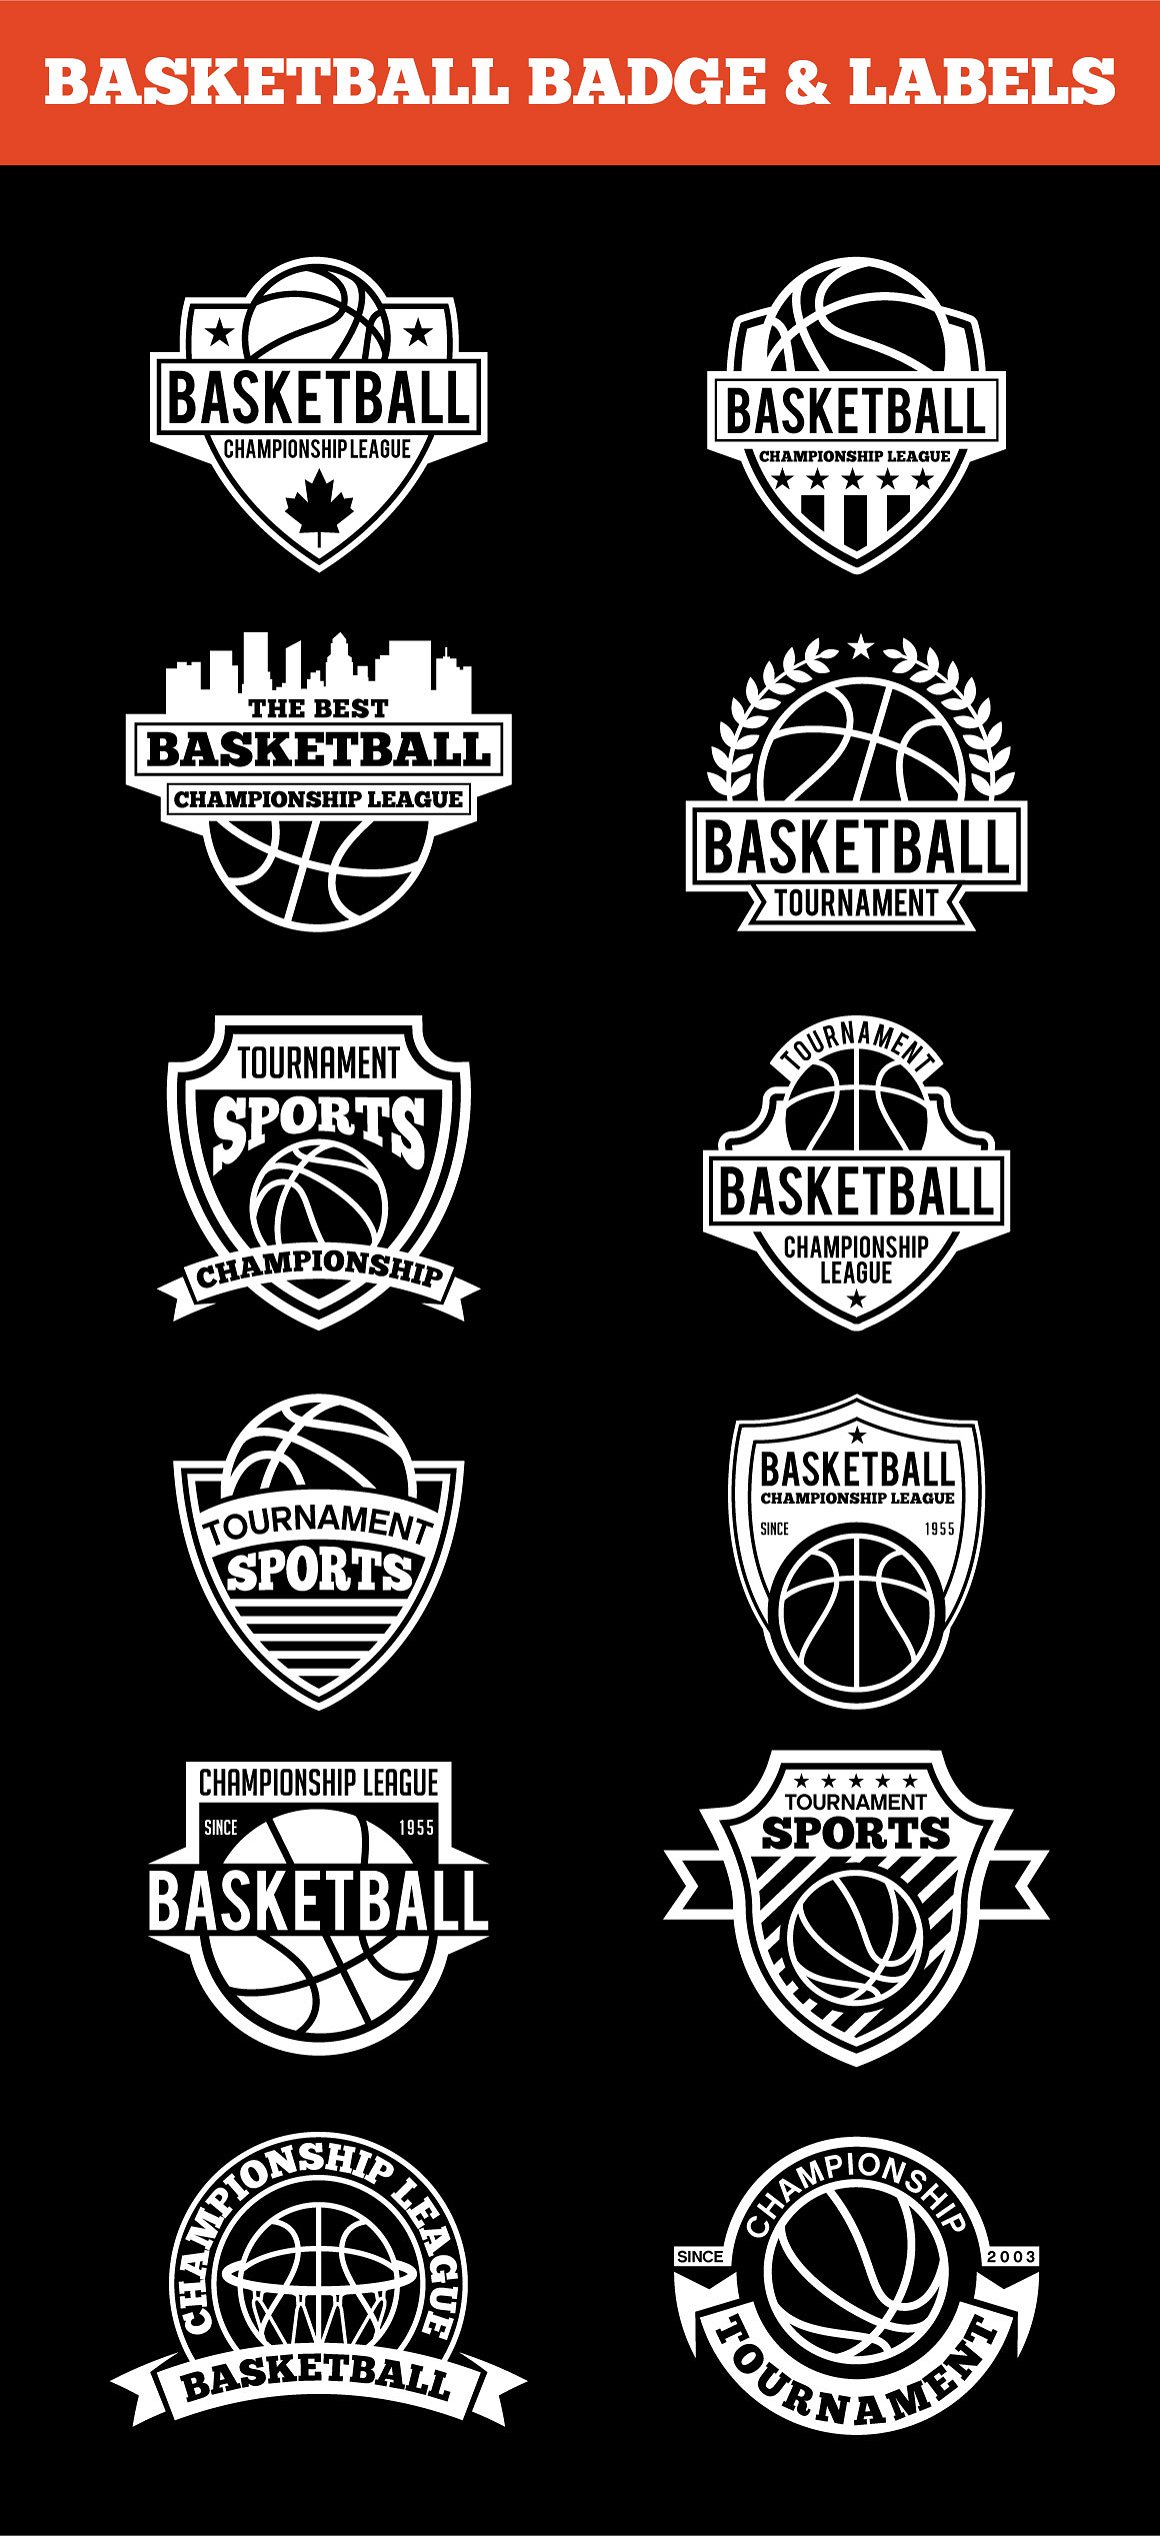 Black background with white sport logos.